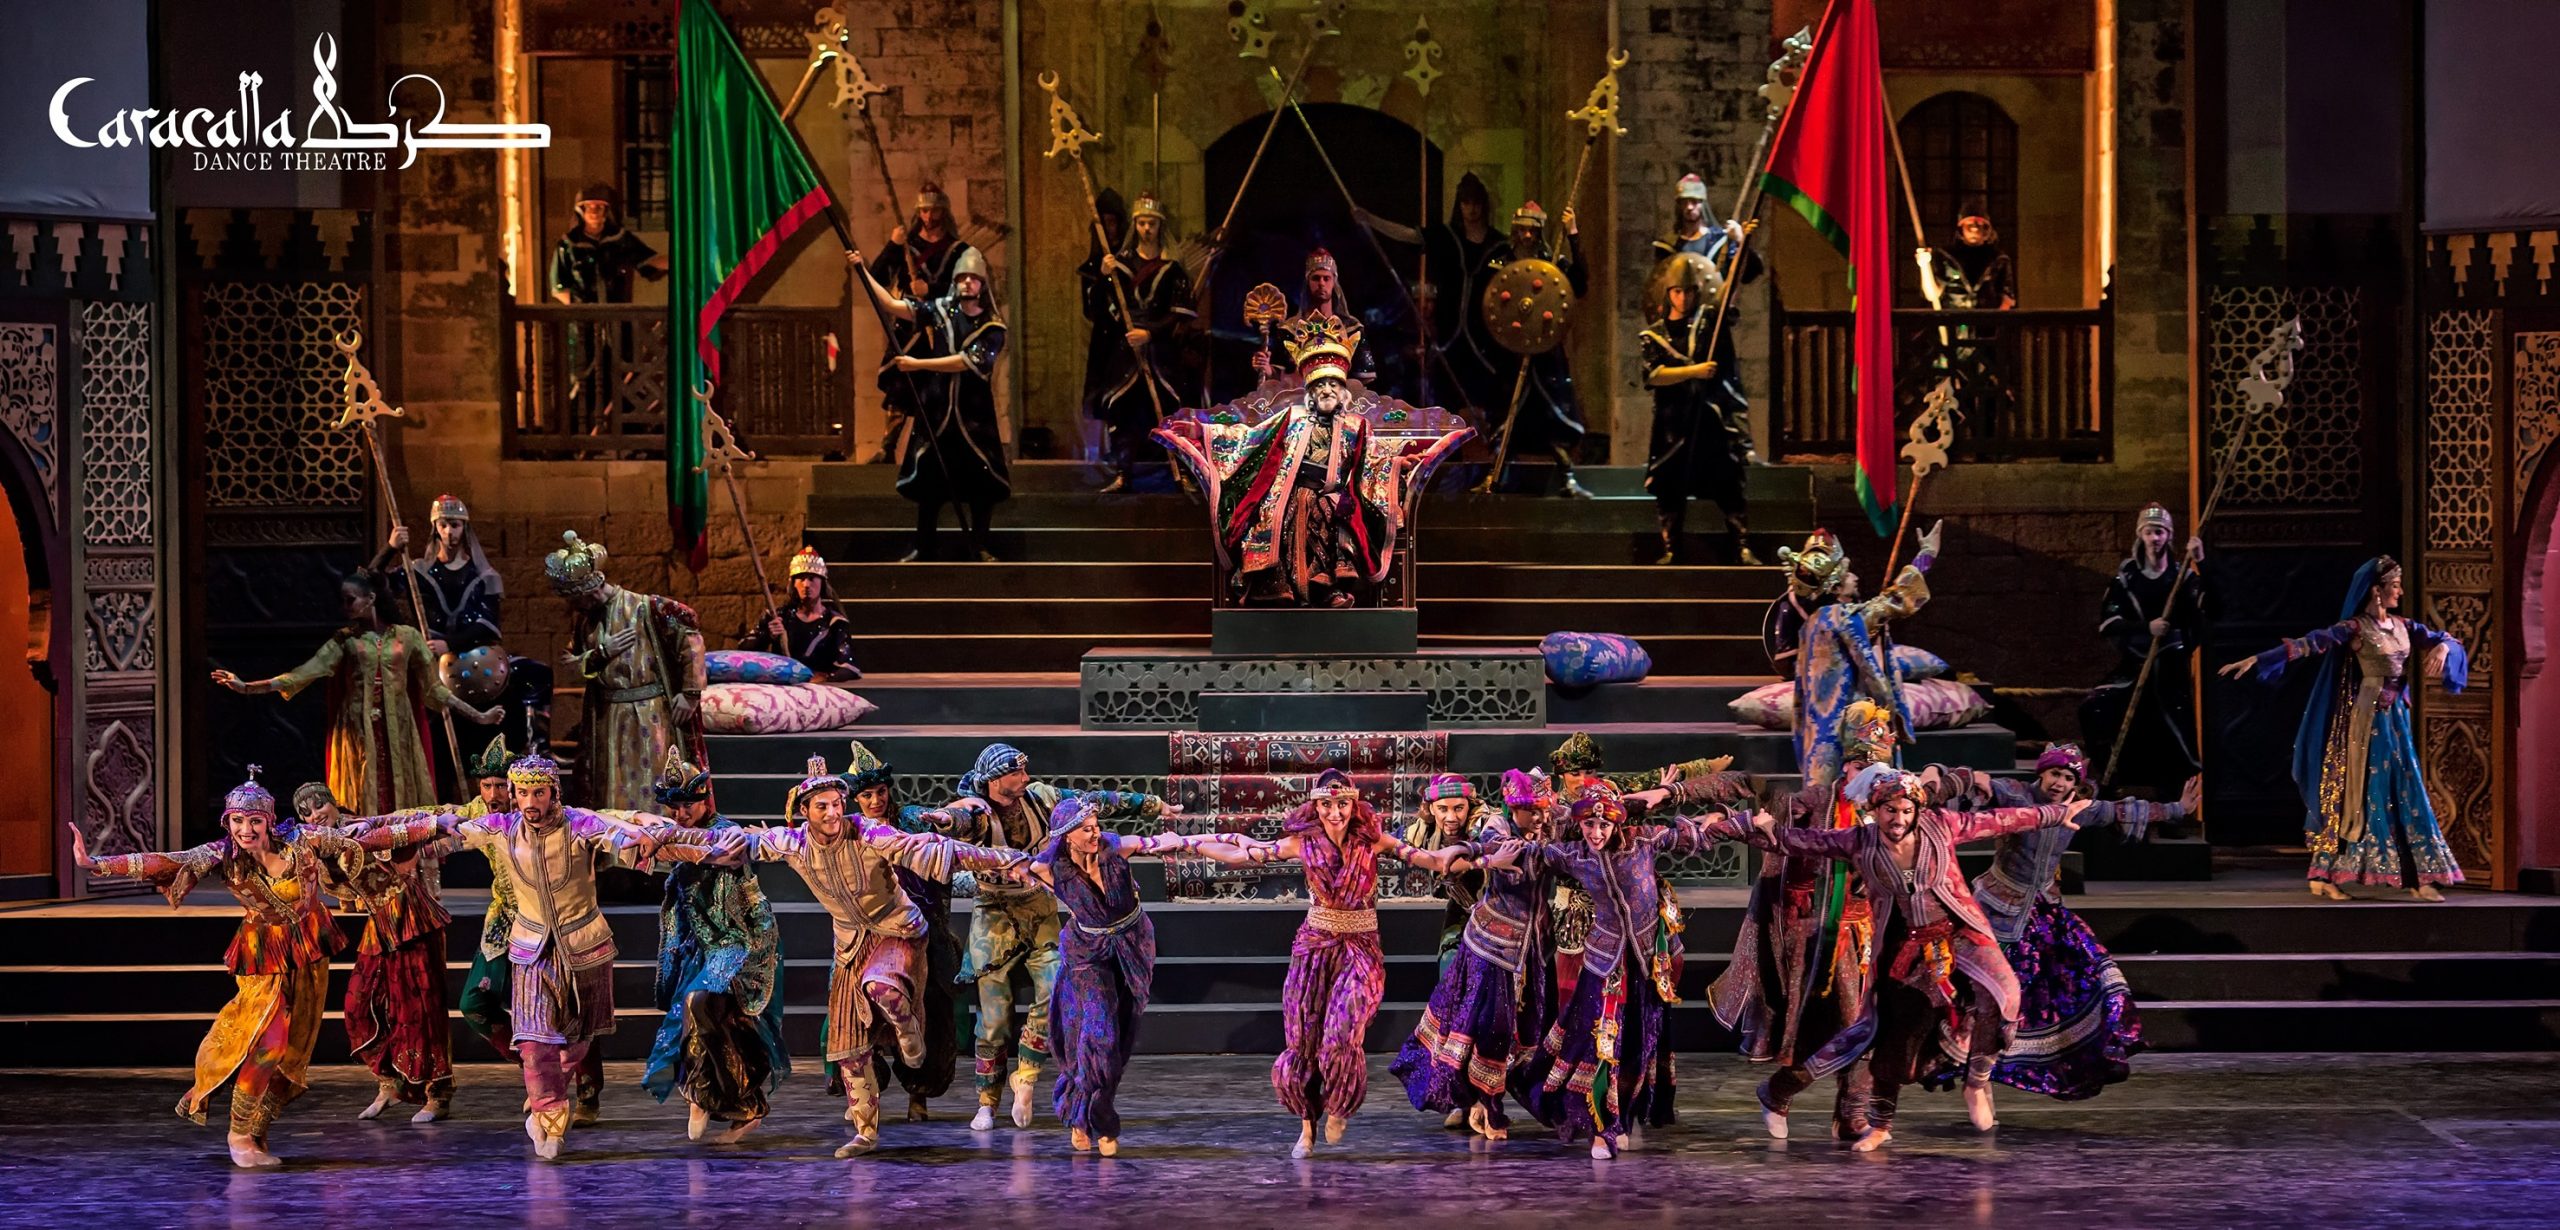 Caracalla Dance Theatre – A Thousand and One Nights - Coming Soon in UAE